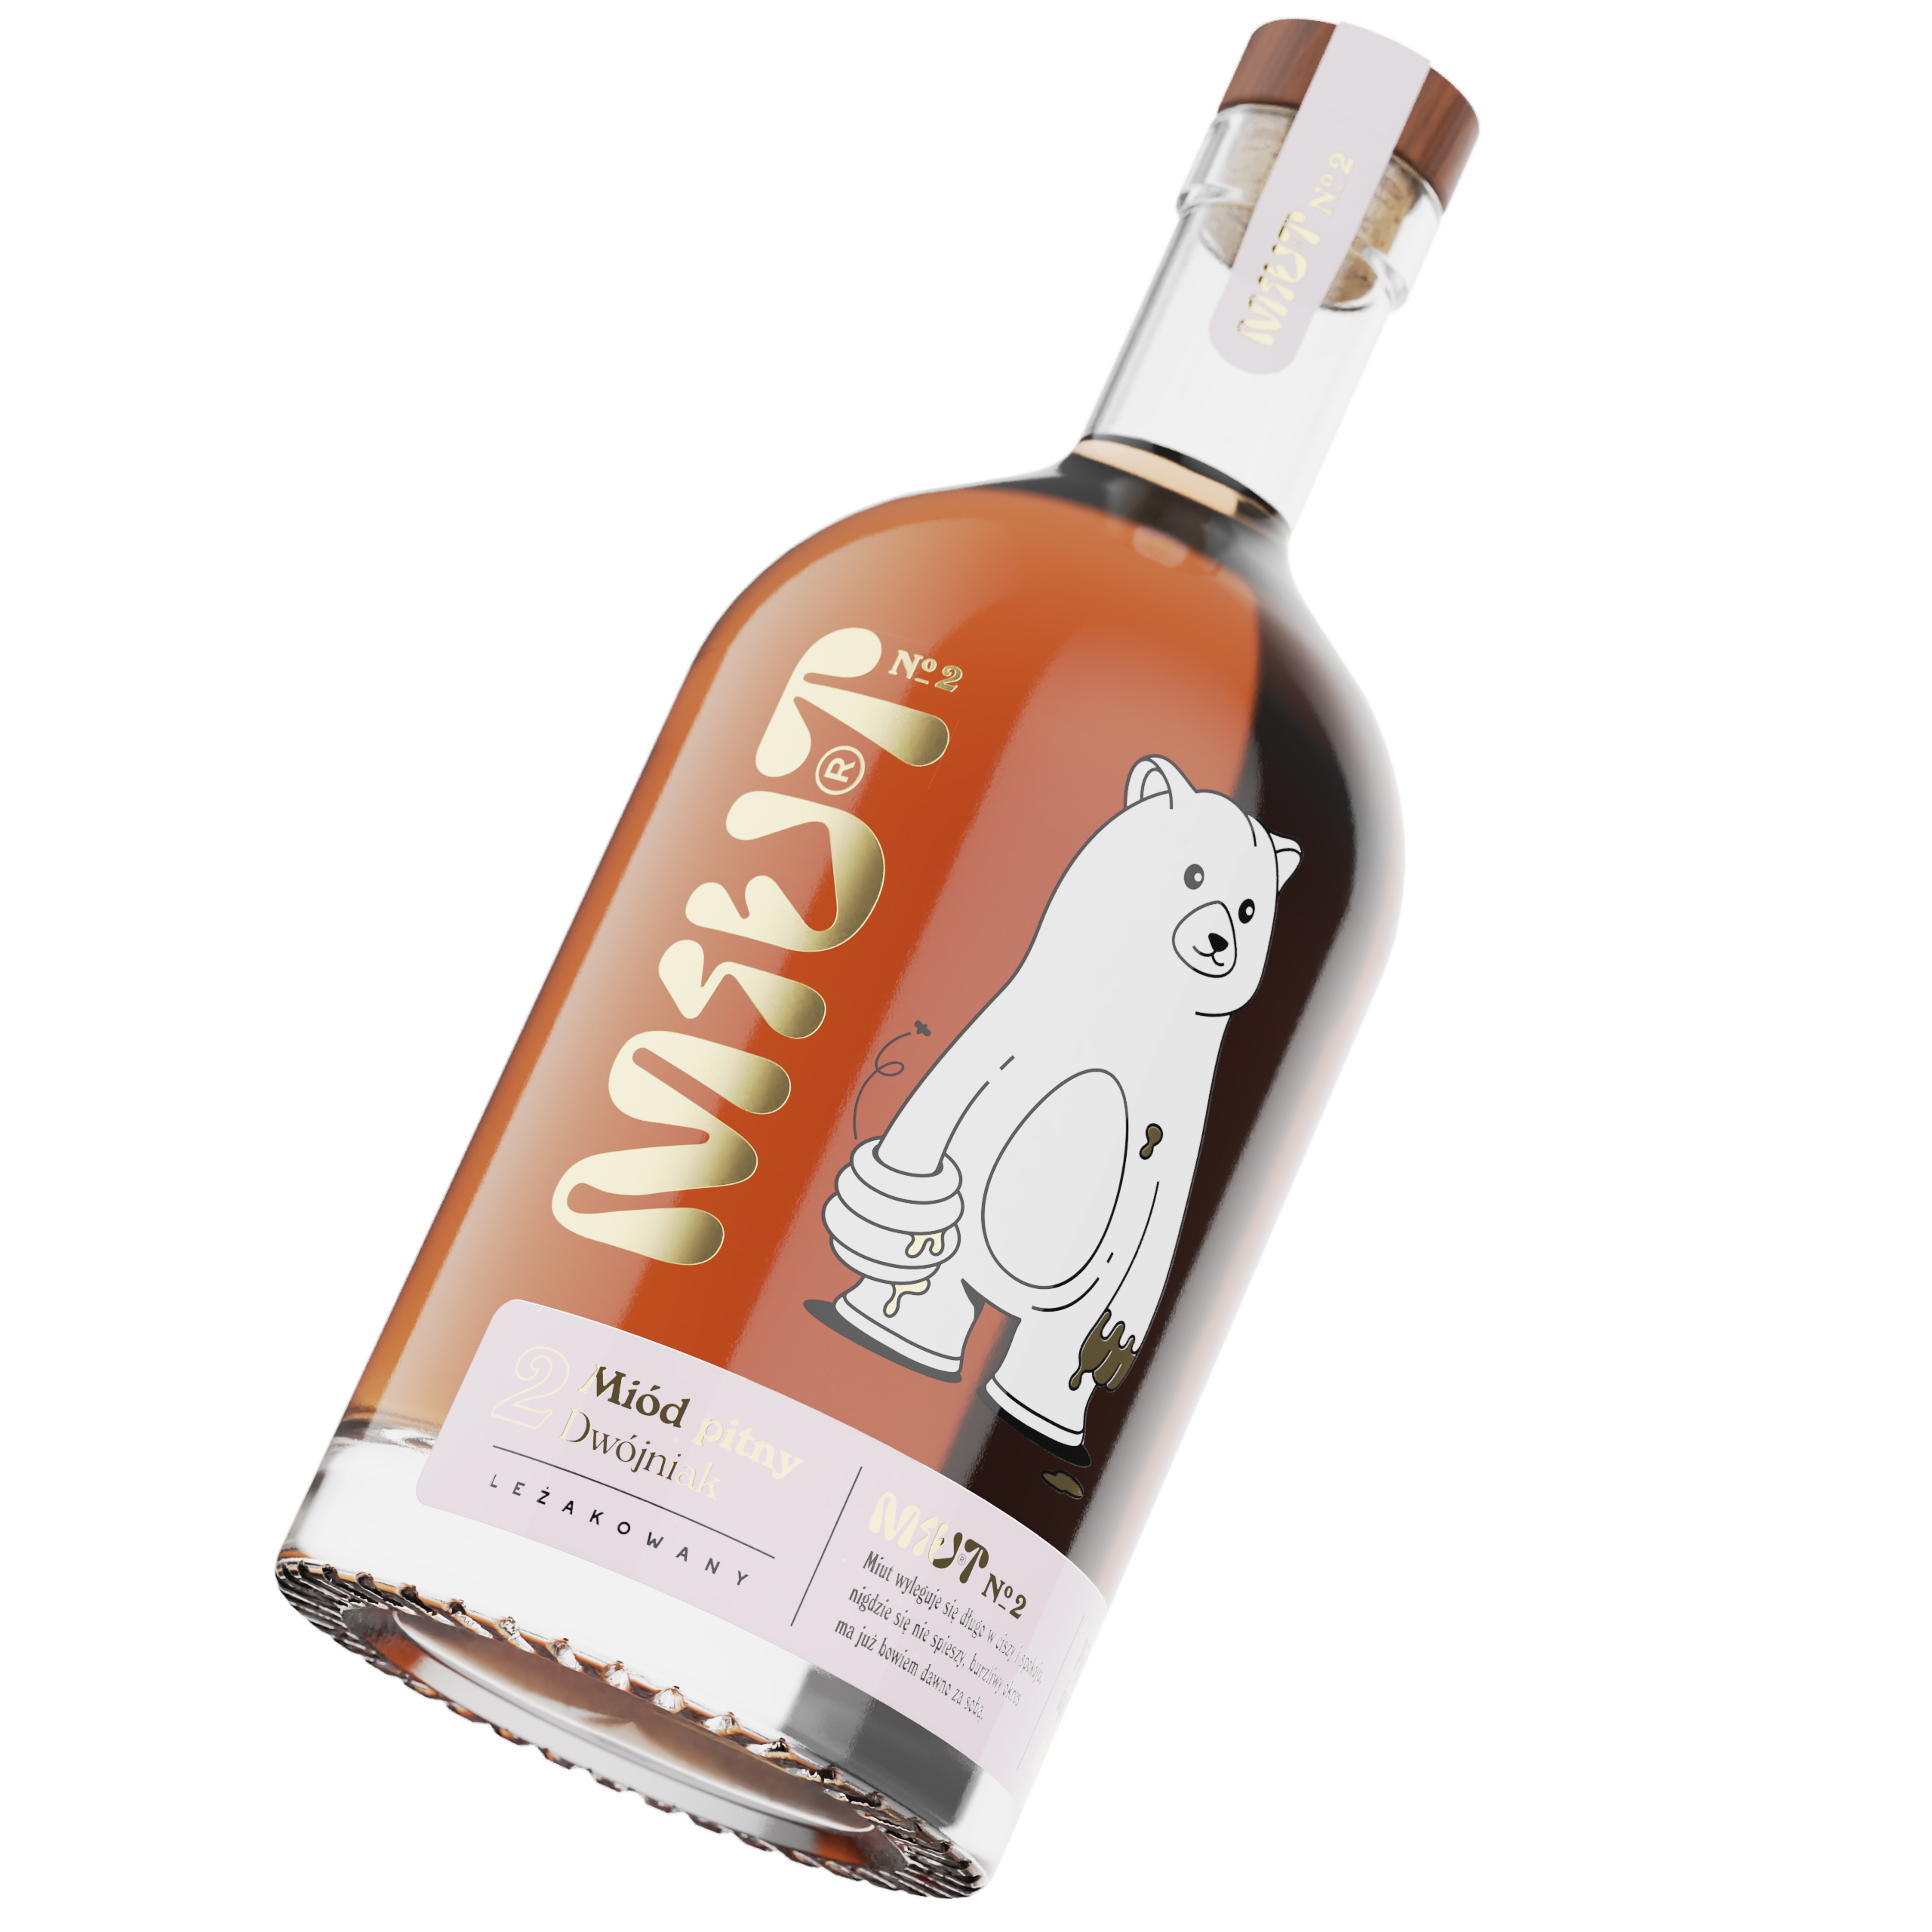 Miut №2 – Mead Branding and Packaging Concept